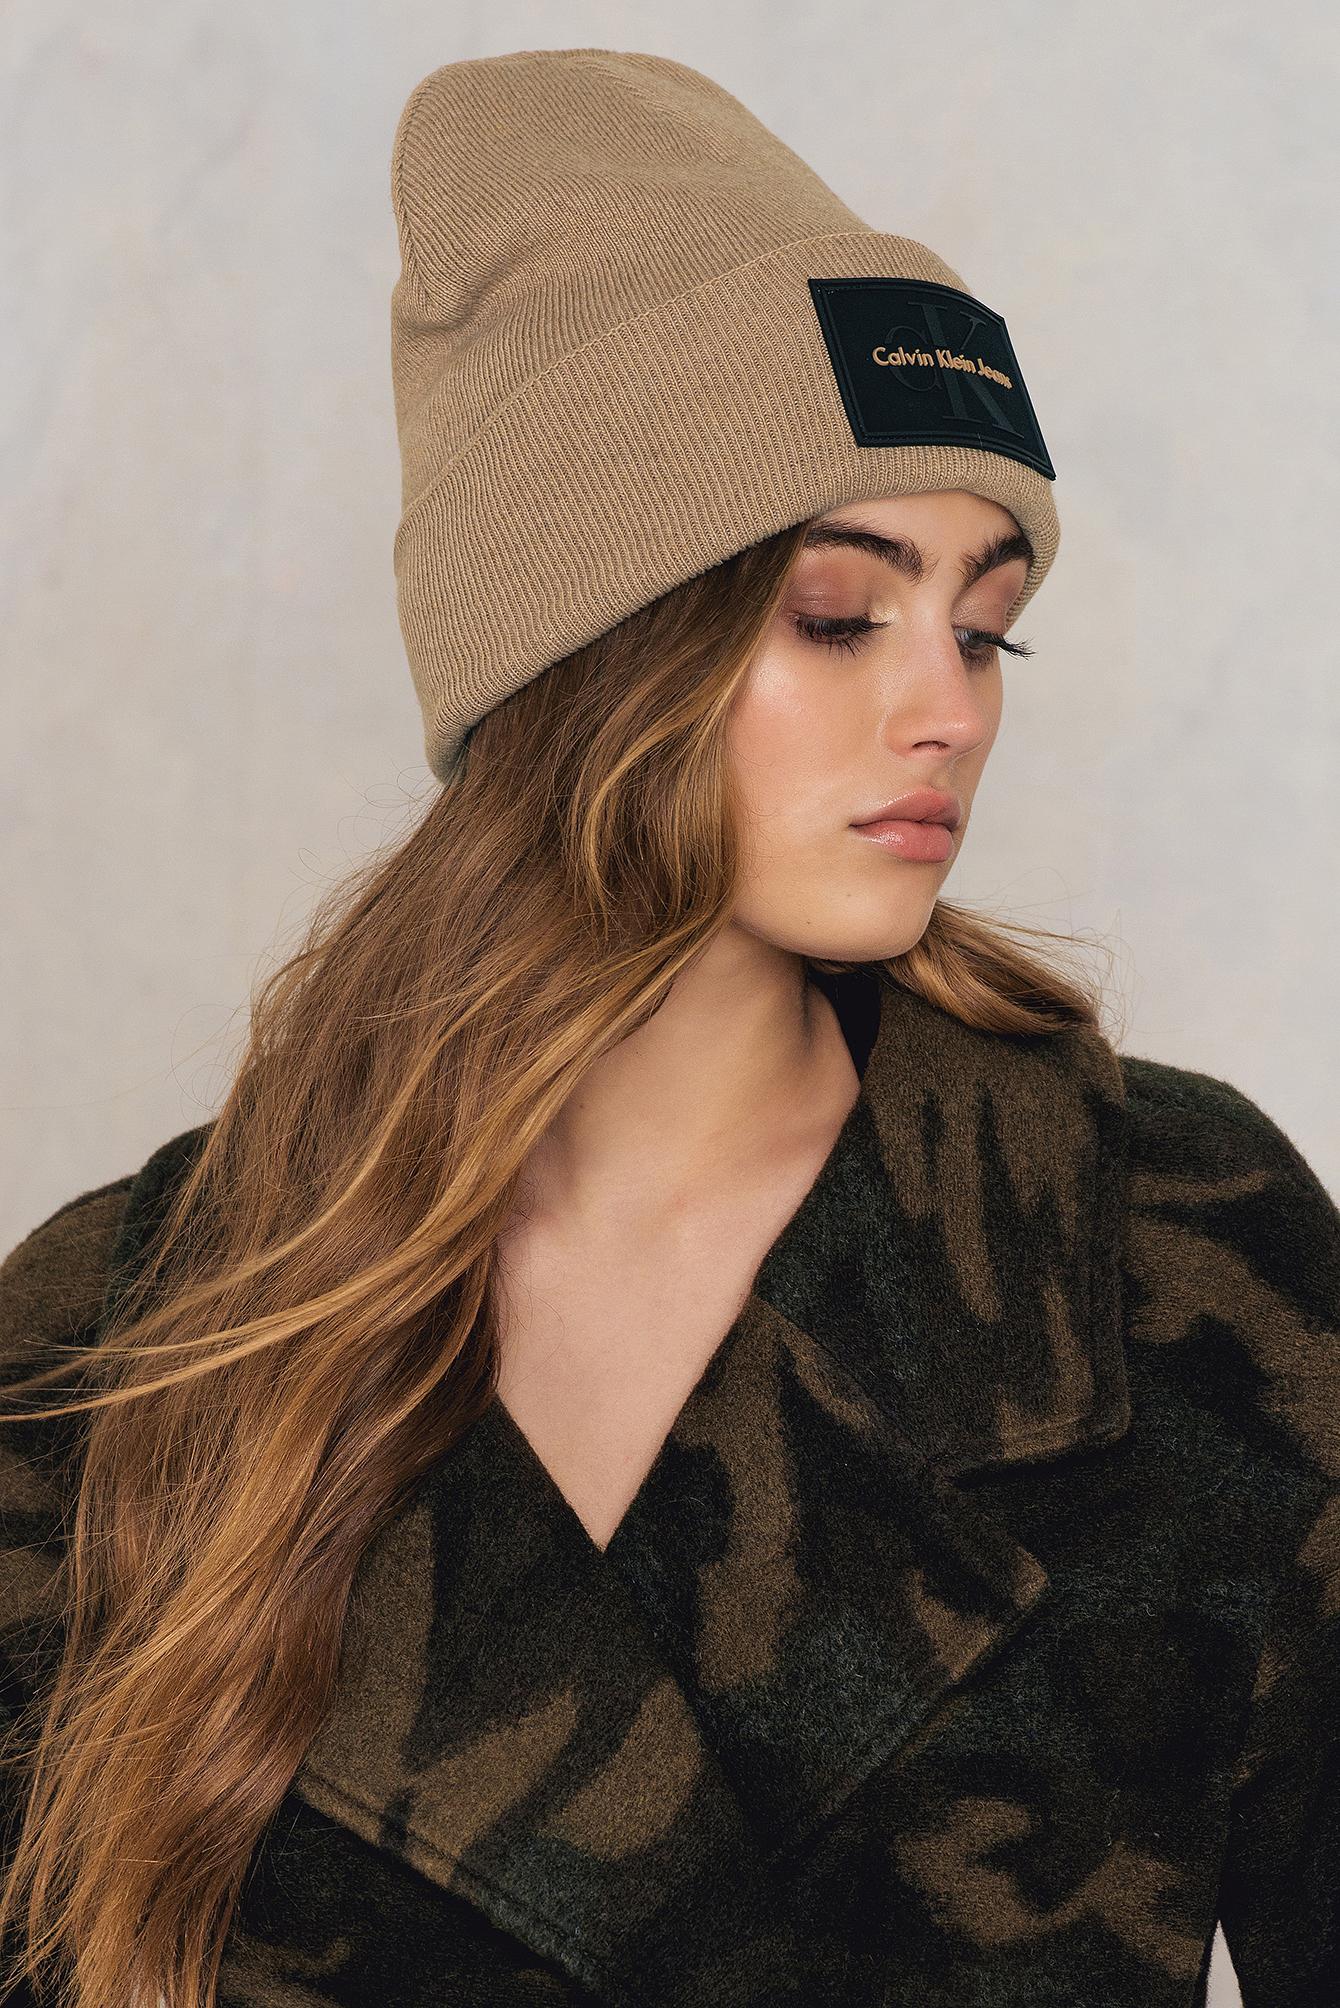 calvin klein beanie womens Cheaper Than Retail Price> Buy Clothing,  Accessories and lifestyle products for women & men -